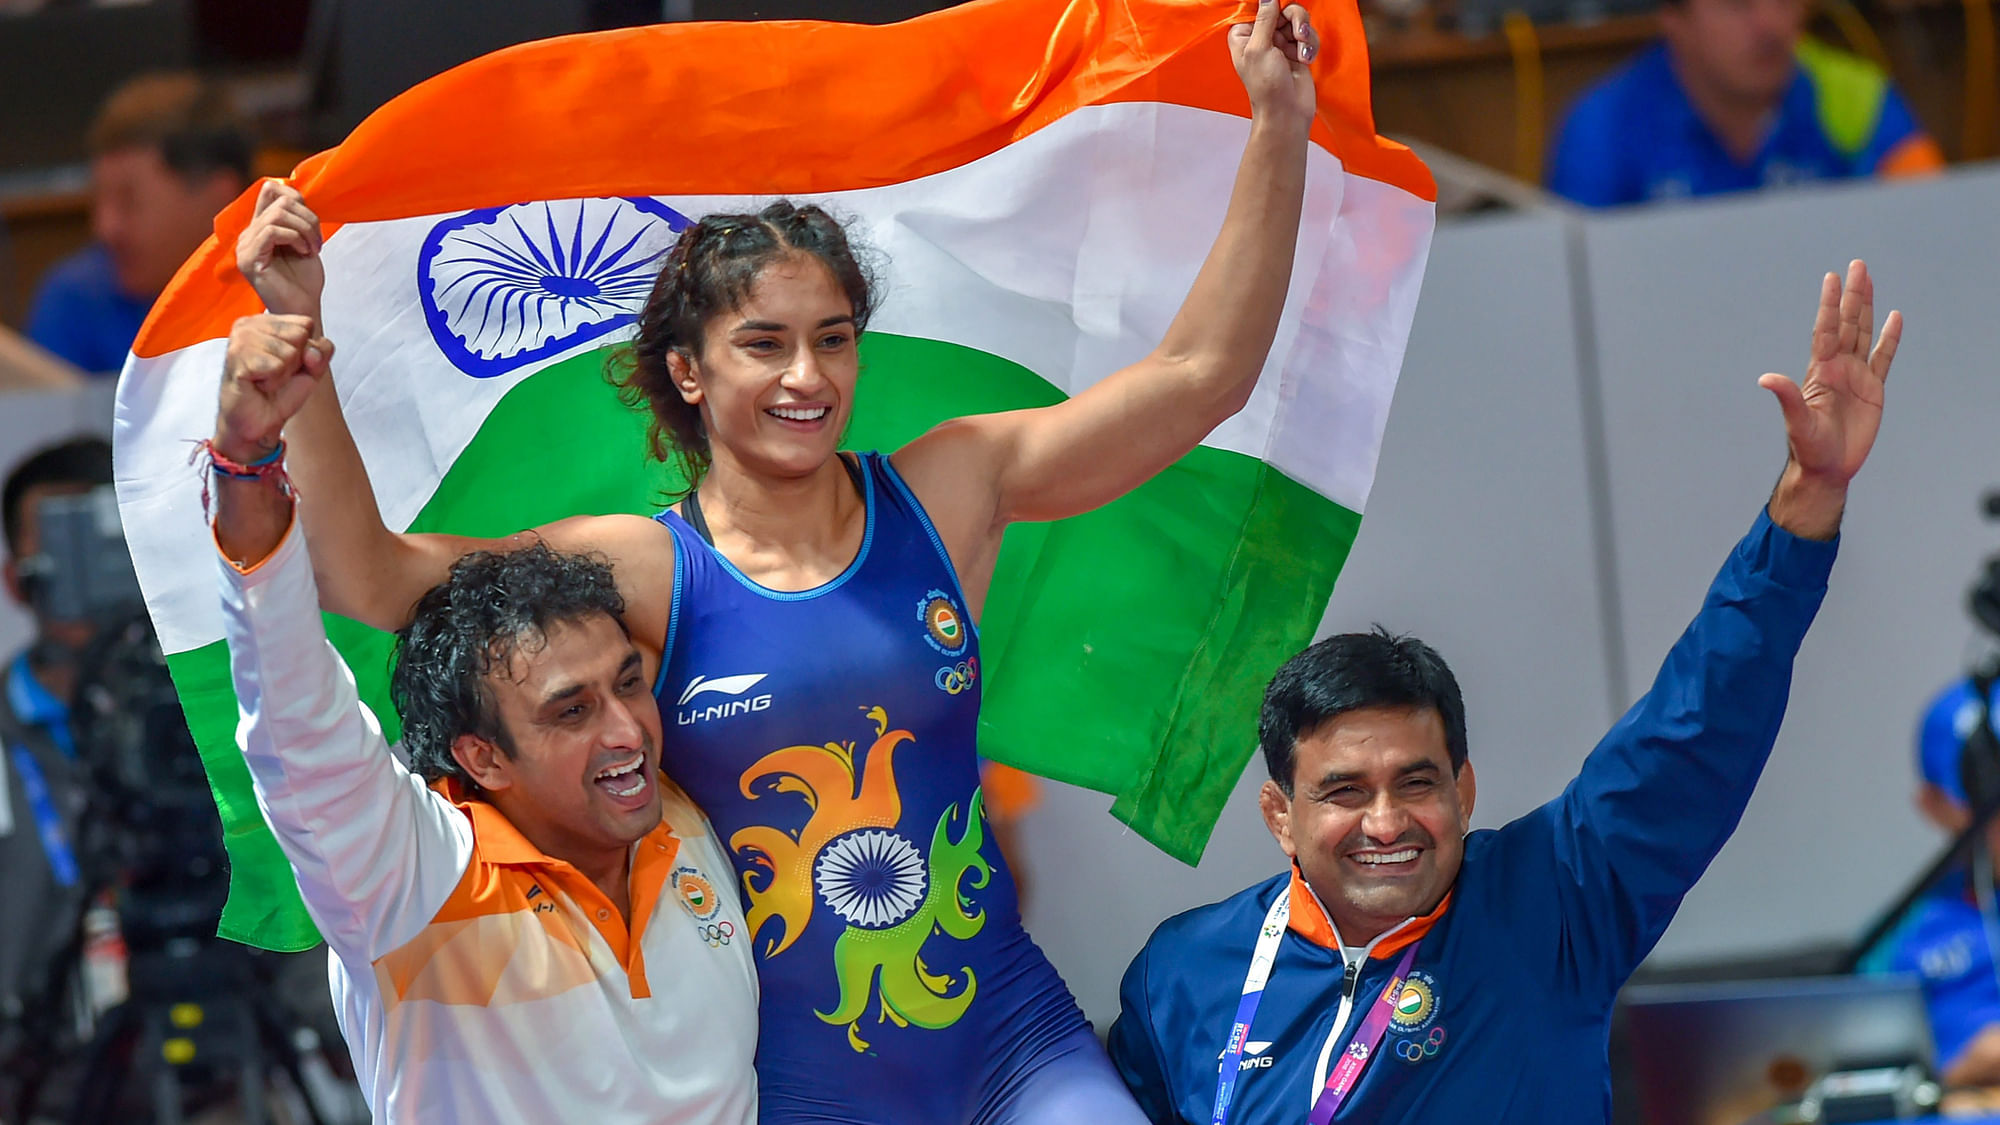 File picture of Vinesh Phogat who has become the first India wrestler to qualify for the 2020 Tokyo Olympics.